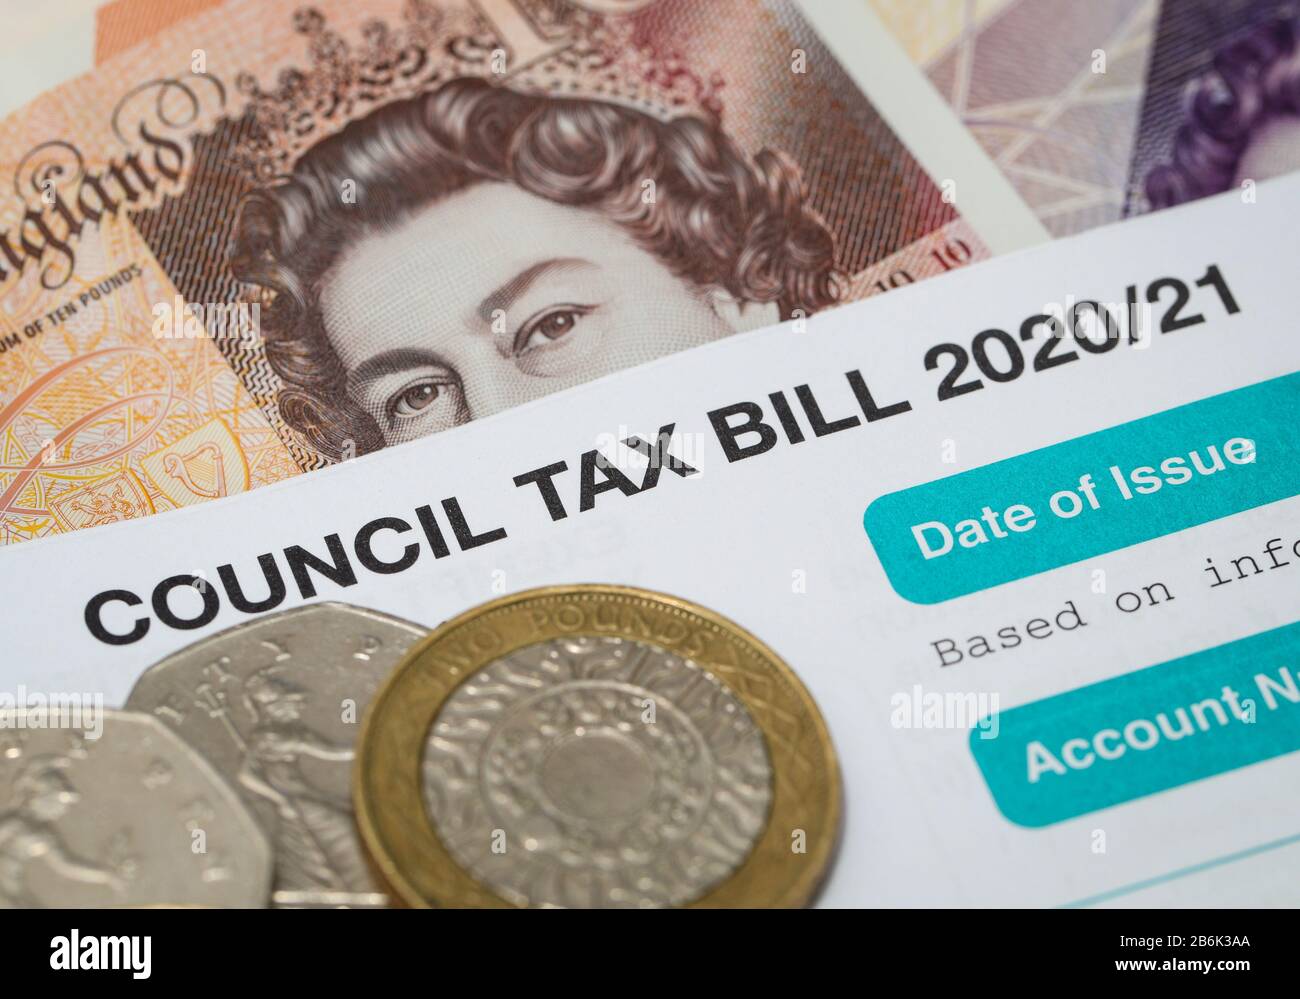 Council Tax Bill for 2020/21 Stock Photo